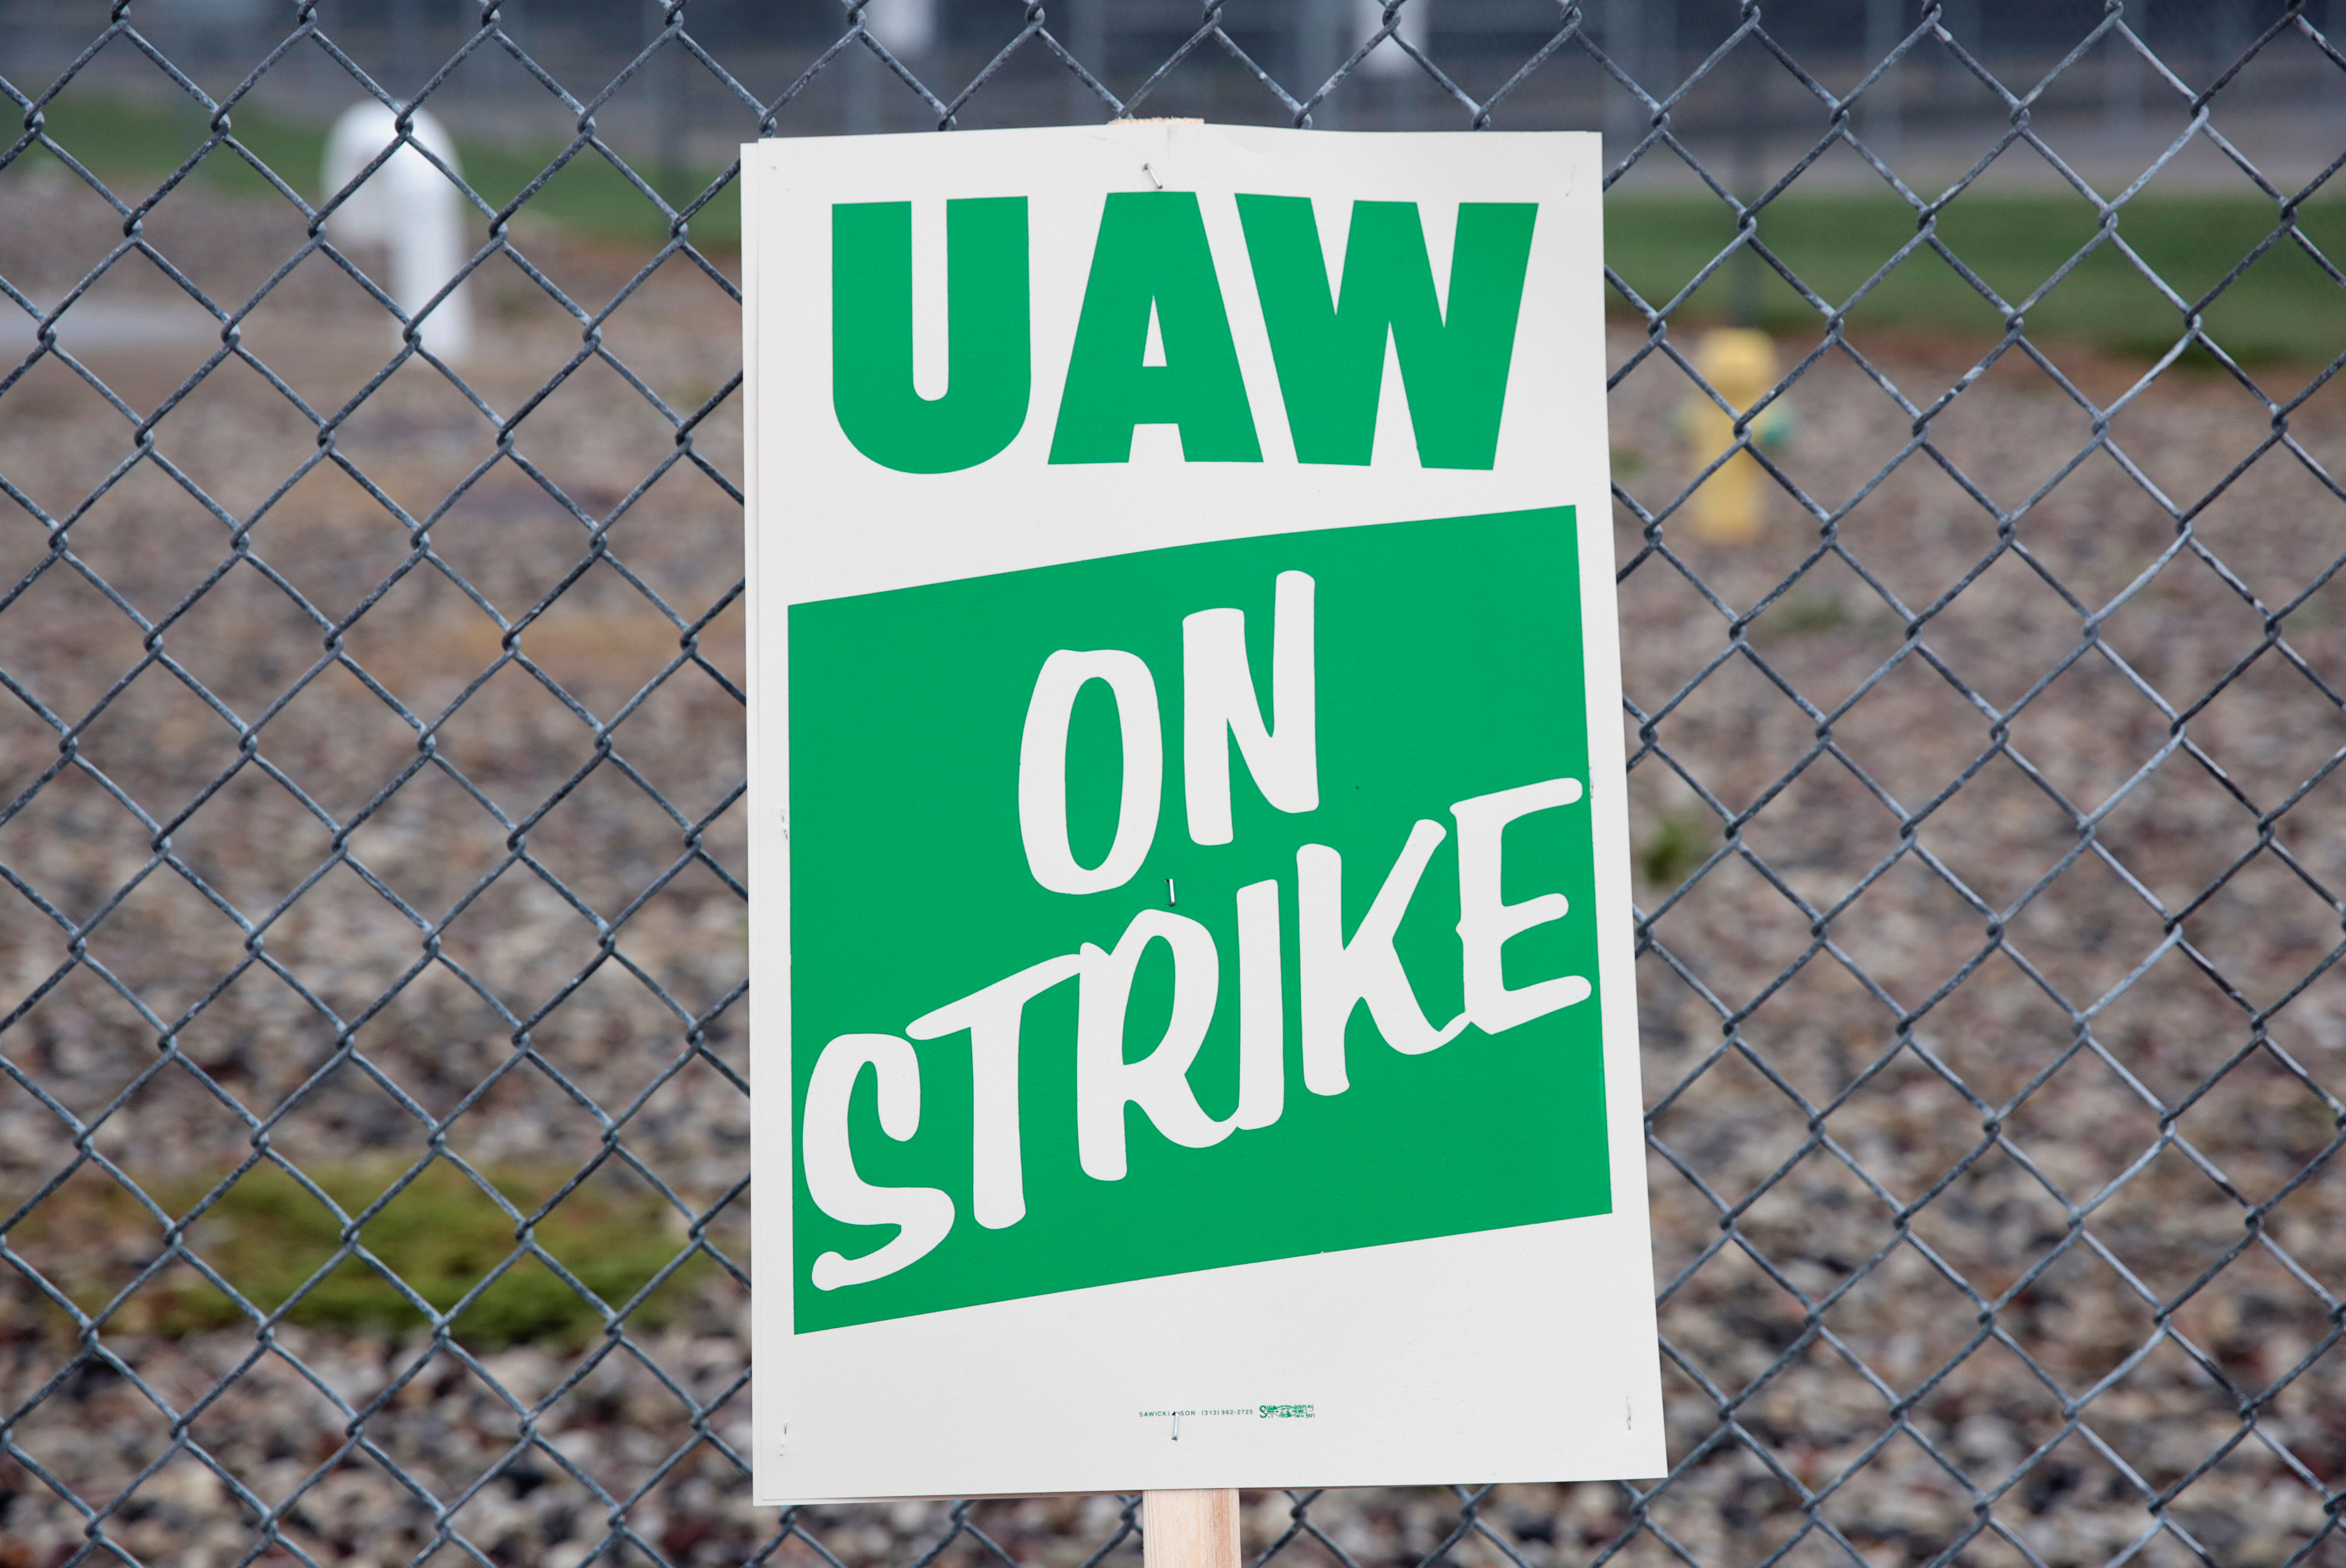 A United Auto Workers (UAW) picket sign is seen in Flint, Michigan, U.S. September 16, 2019.  REUTERS/Rebecca Cook